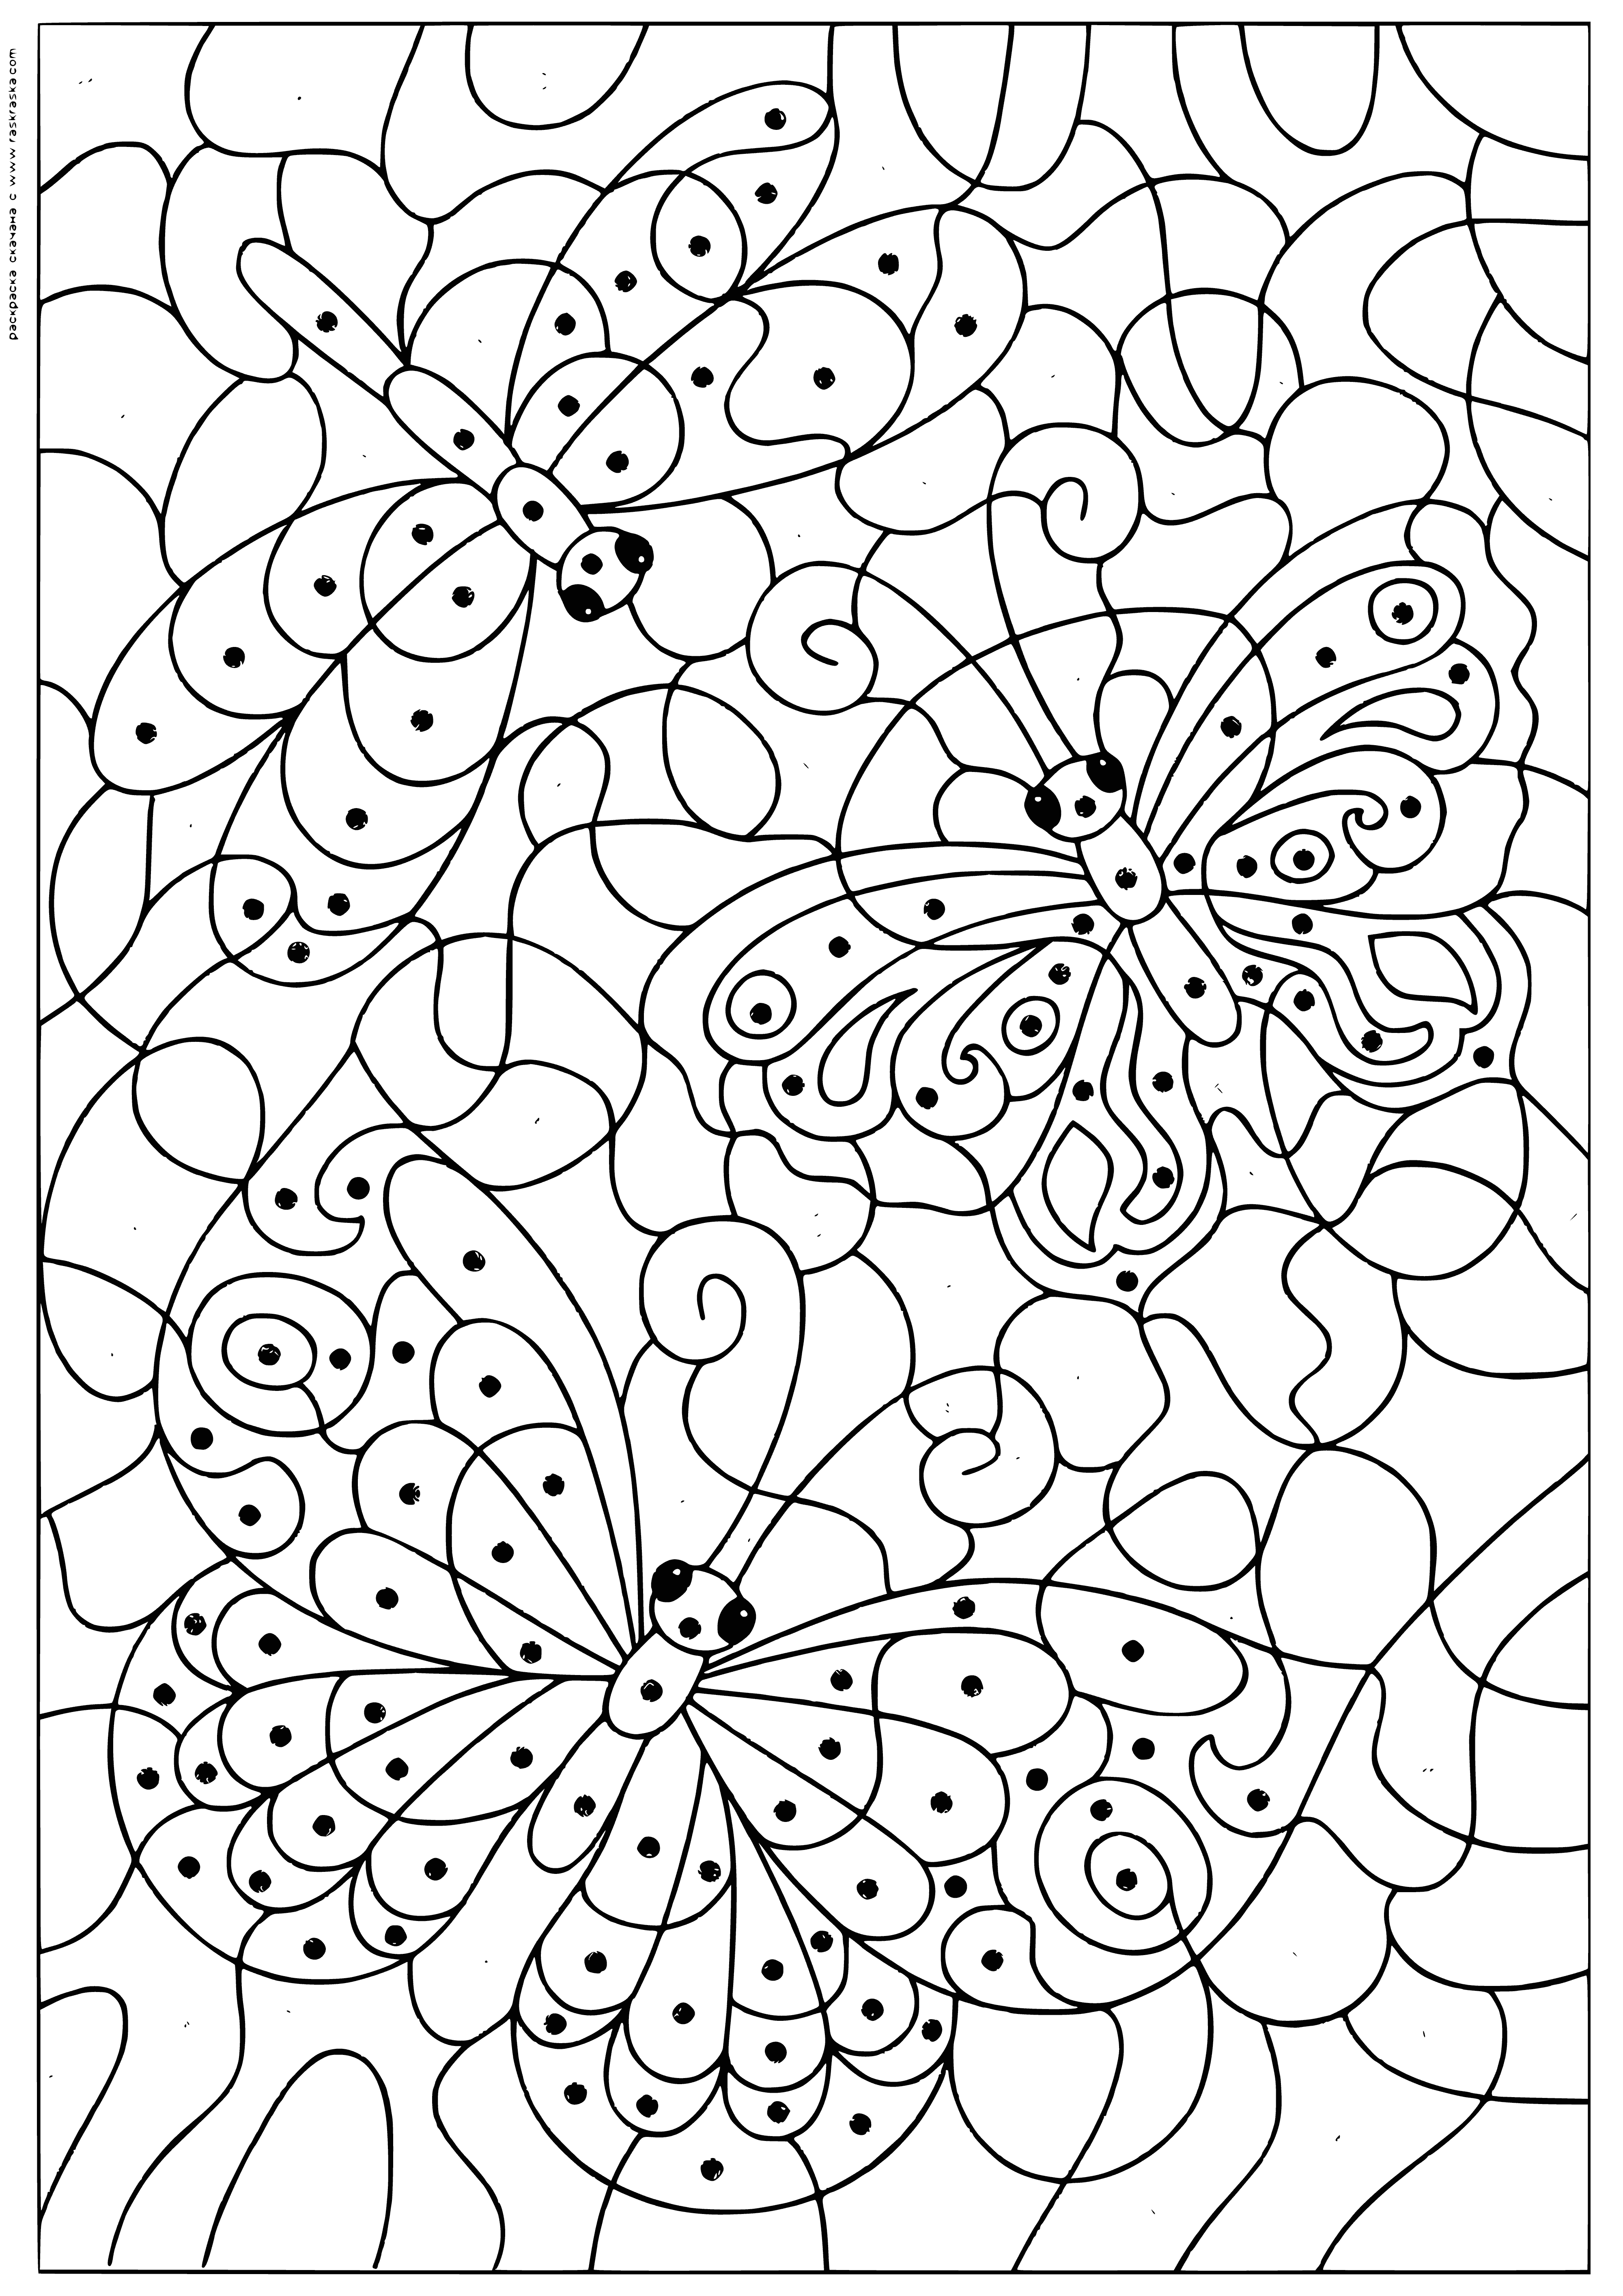 Dragonfly and butterflies coloring page